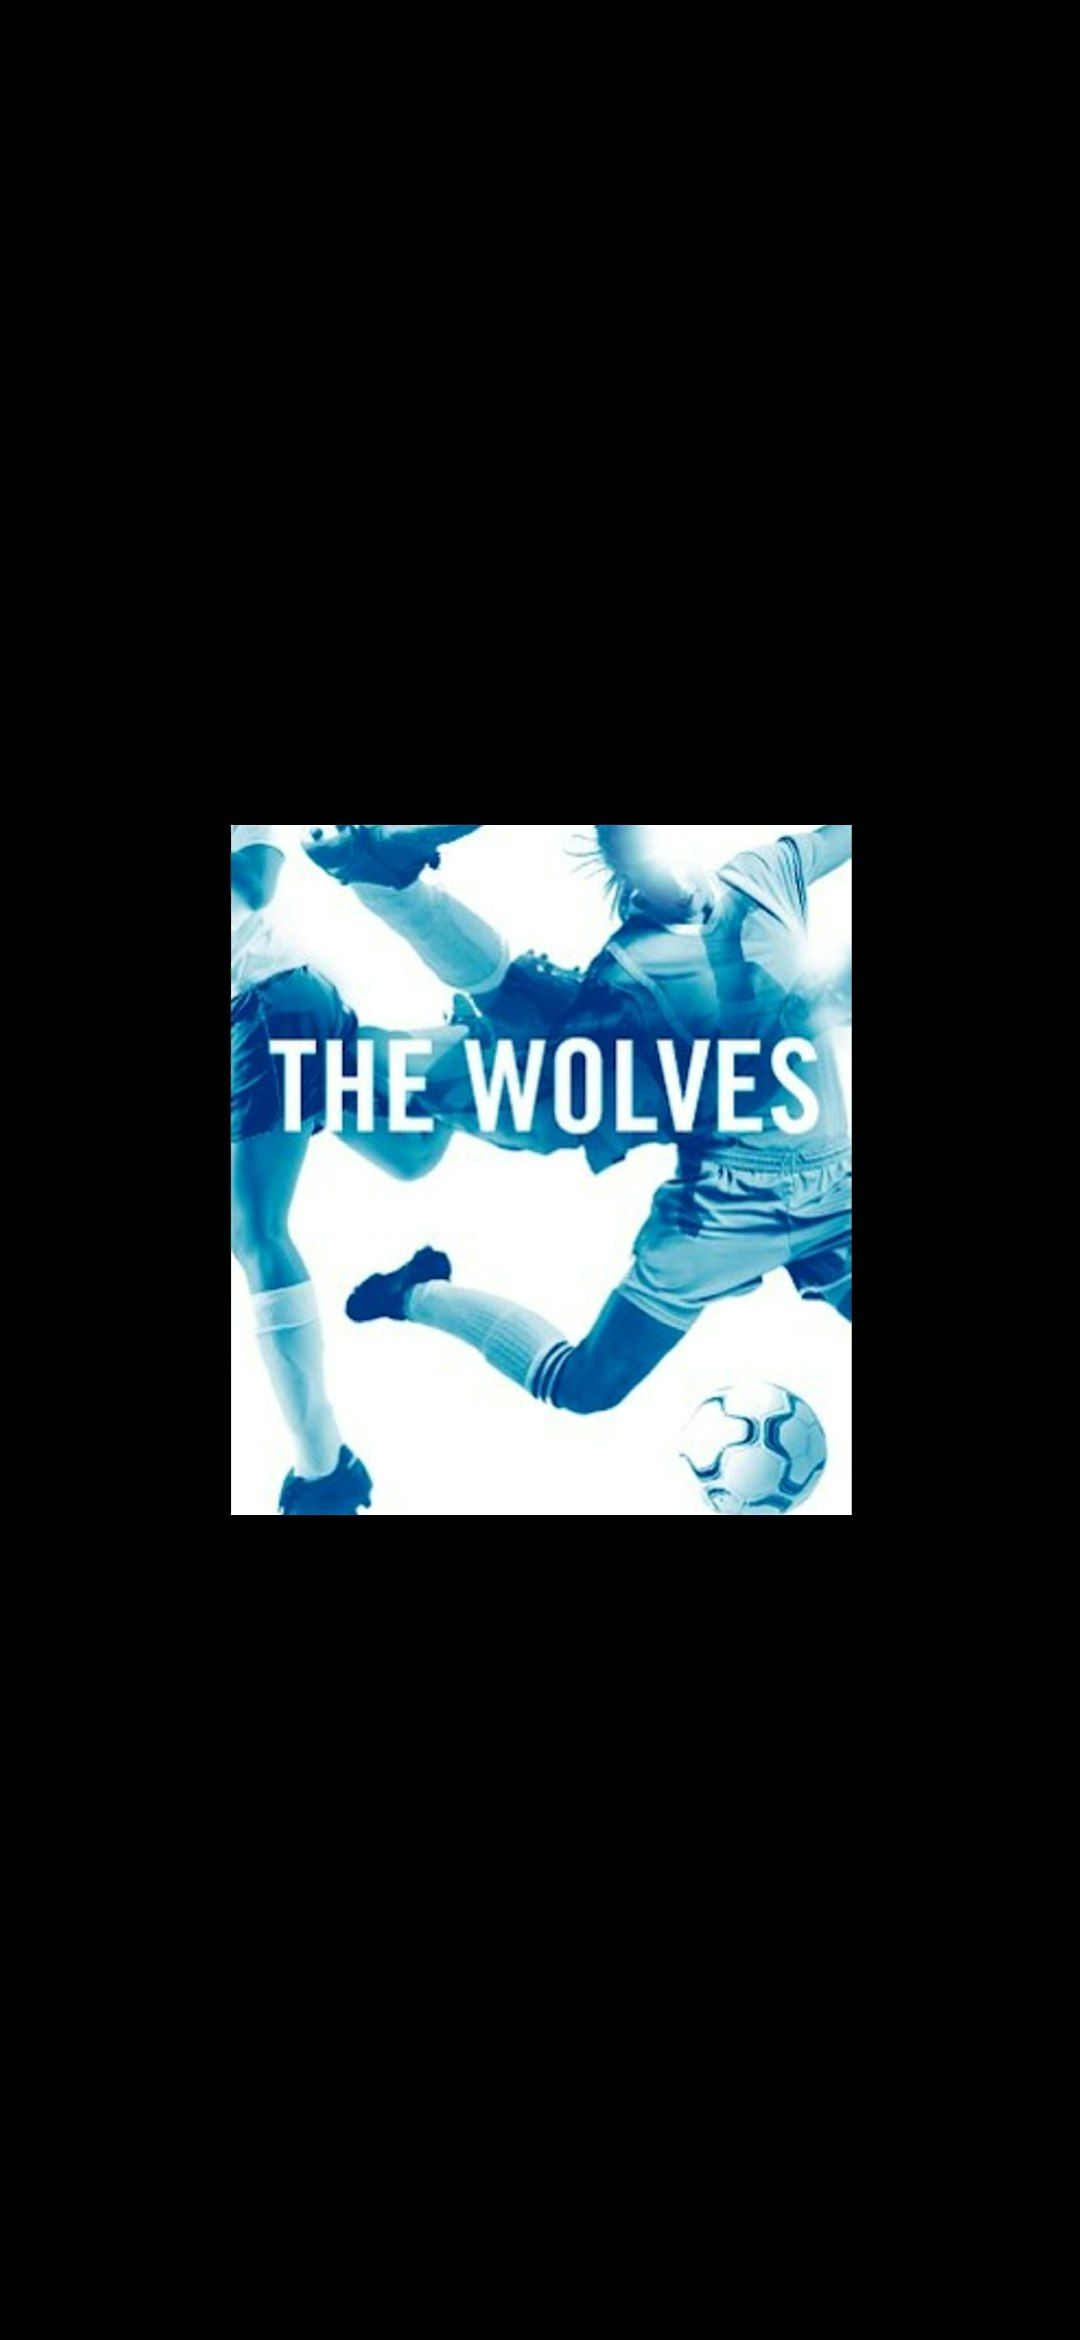 The Wolves Play - Written By Sarah DeLappe (8\/24)